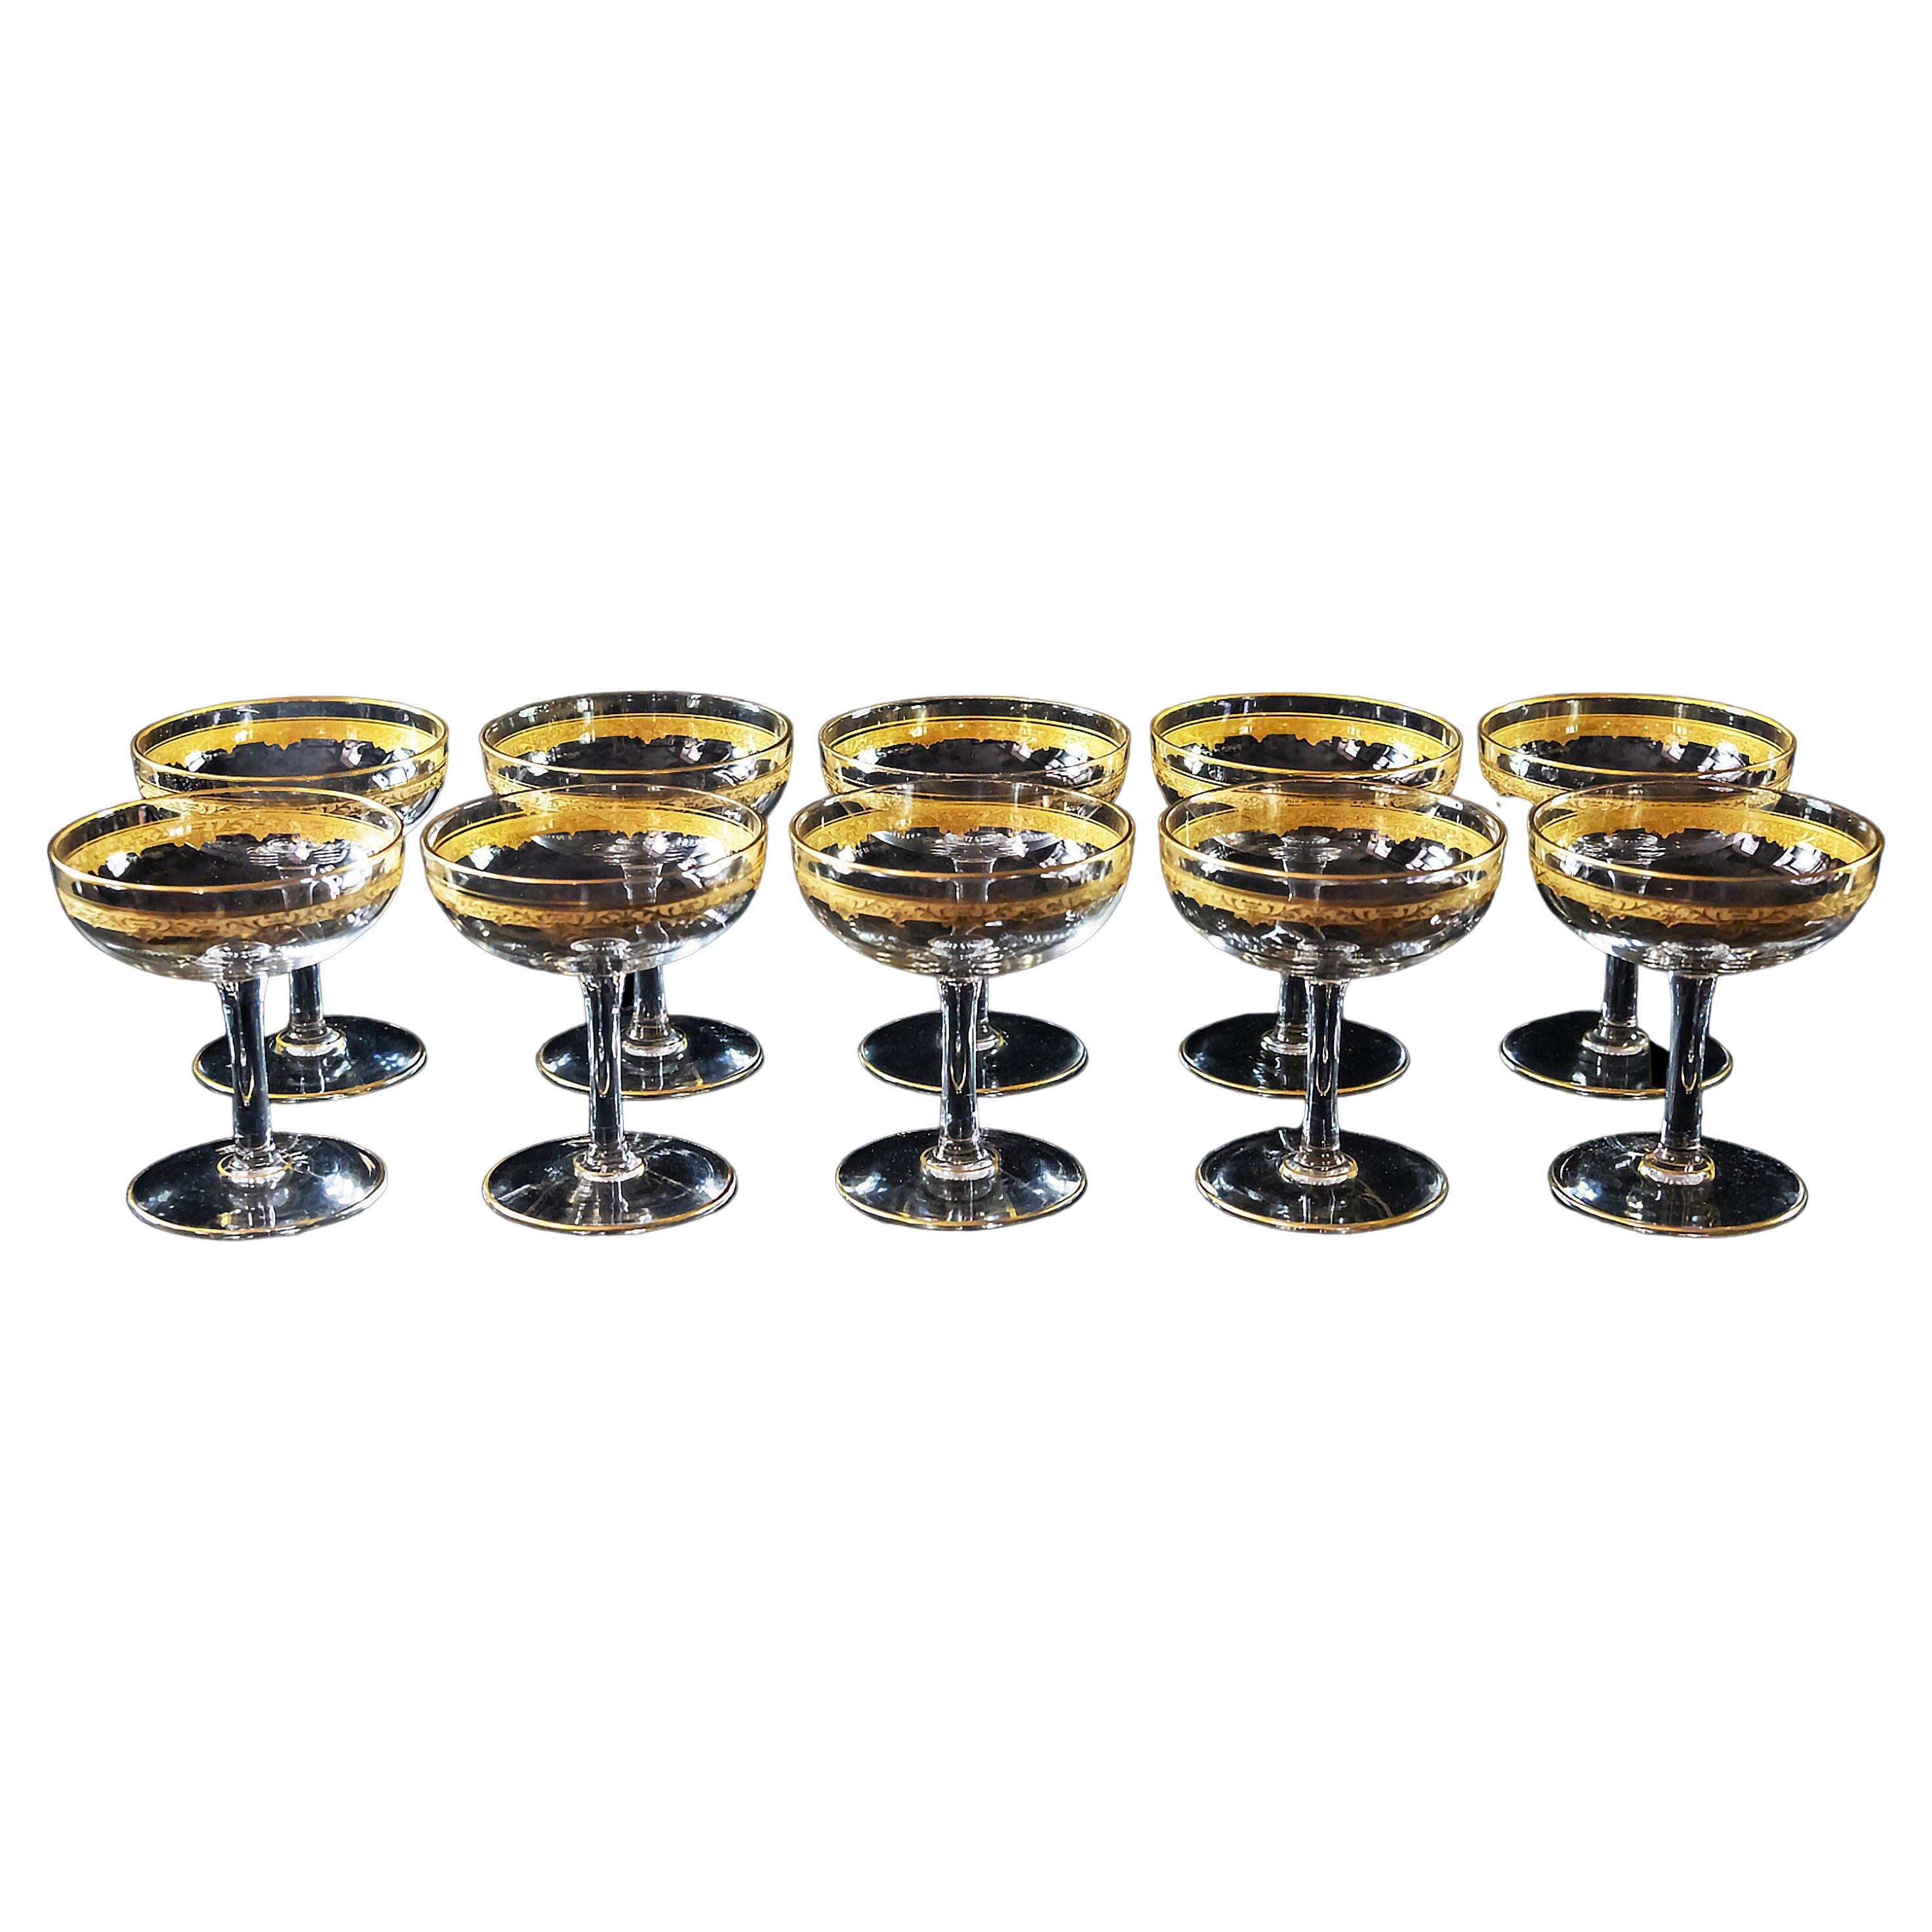 Set of 10 French Saint Louis ROTY collection champagne coupes from early of 20th century.
Old production (before 1936), no signature of the crystal factory.
Very good/excellent condition.

